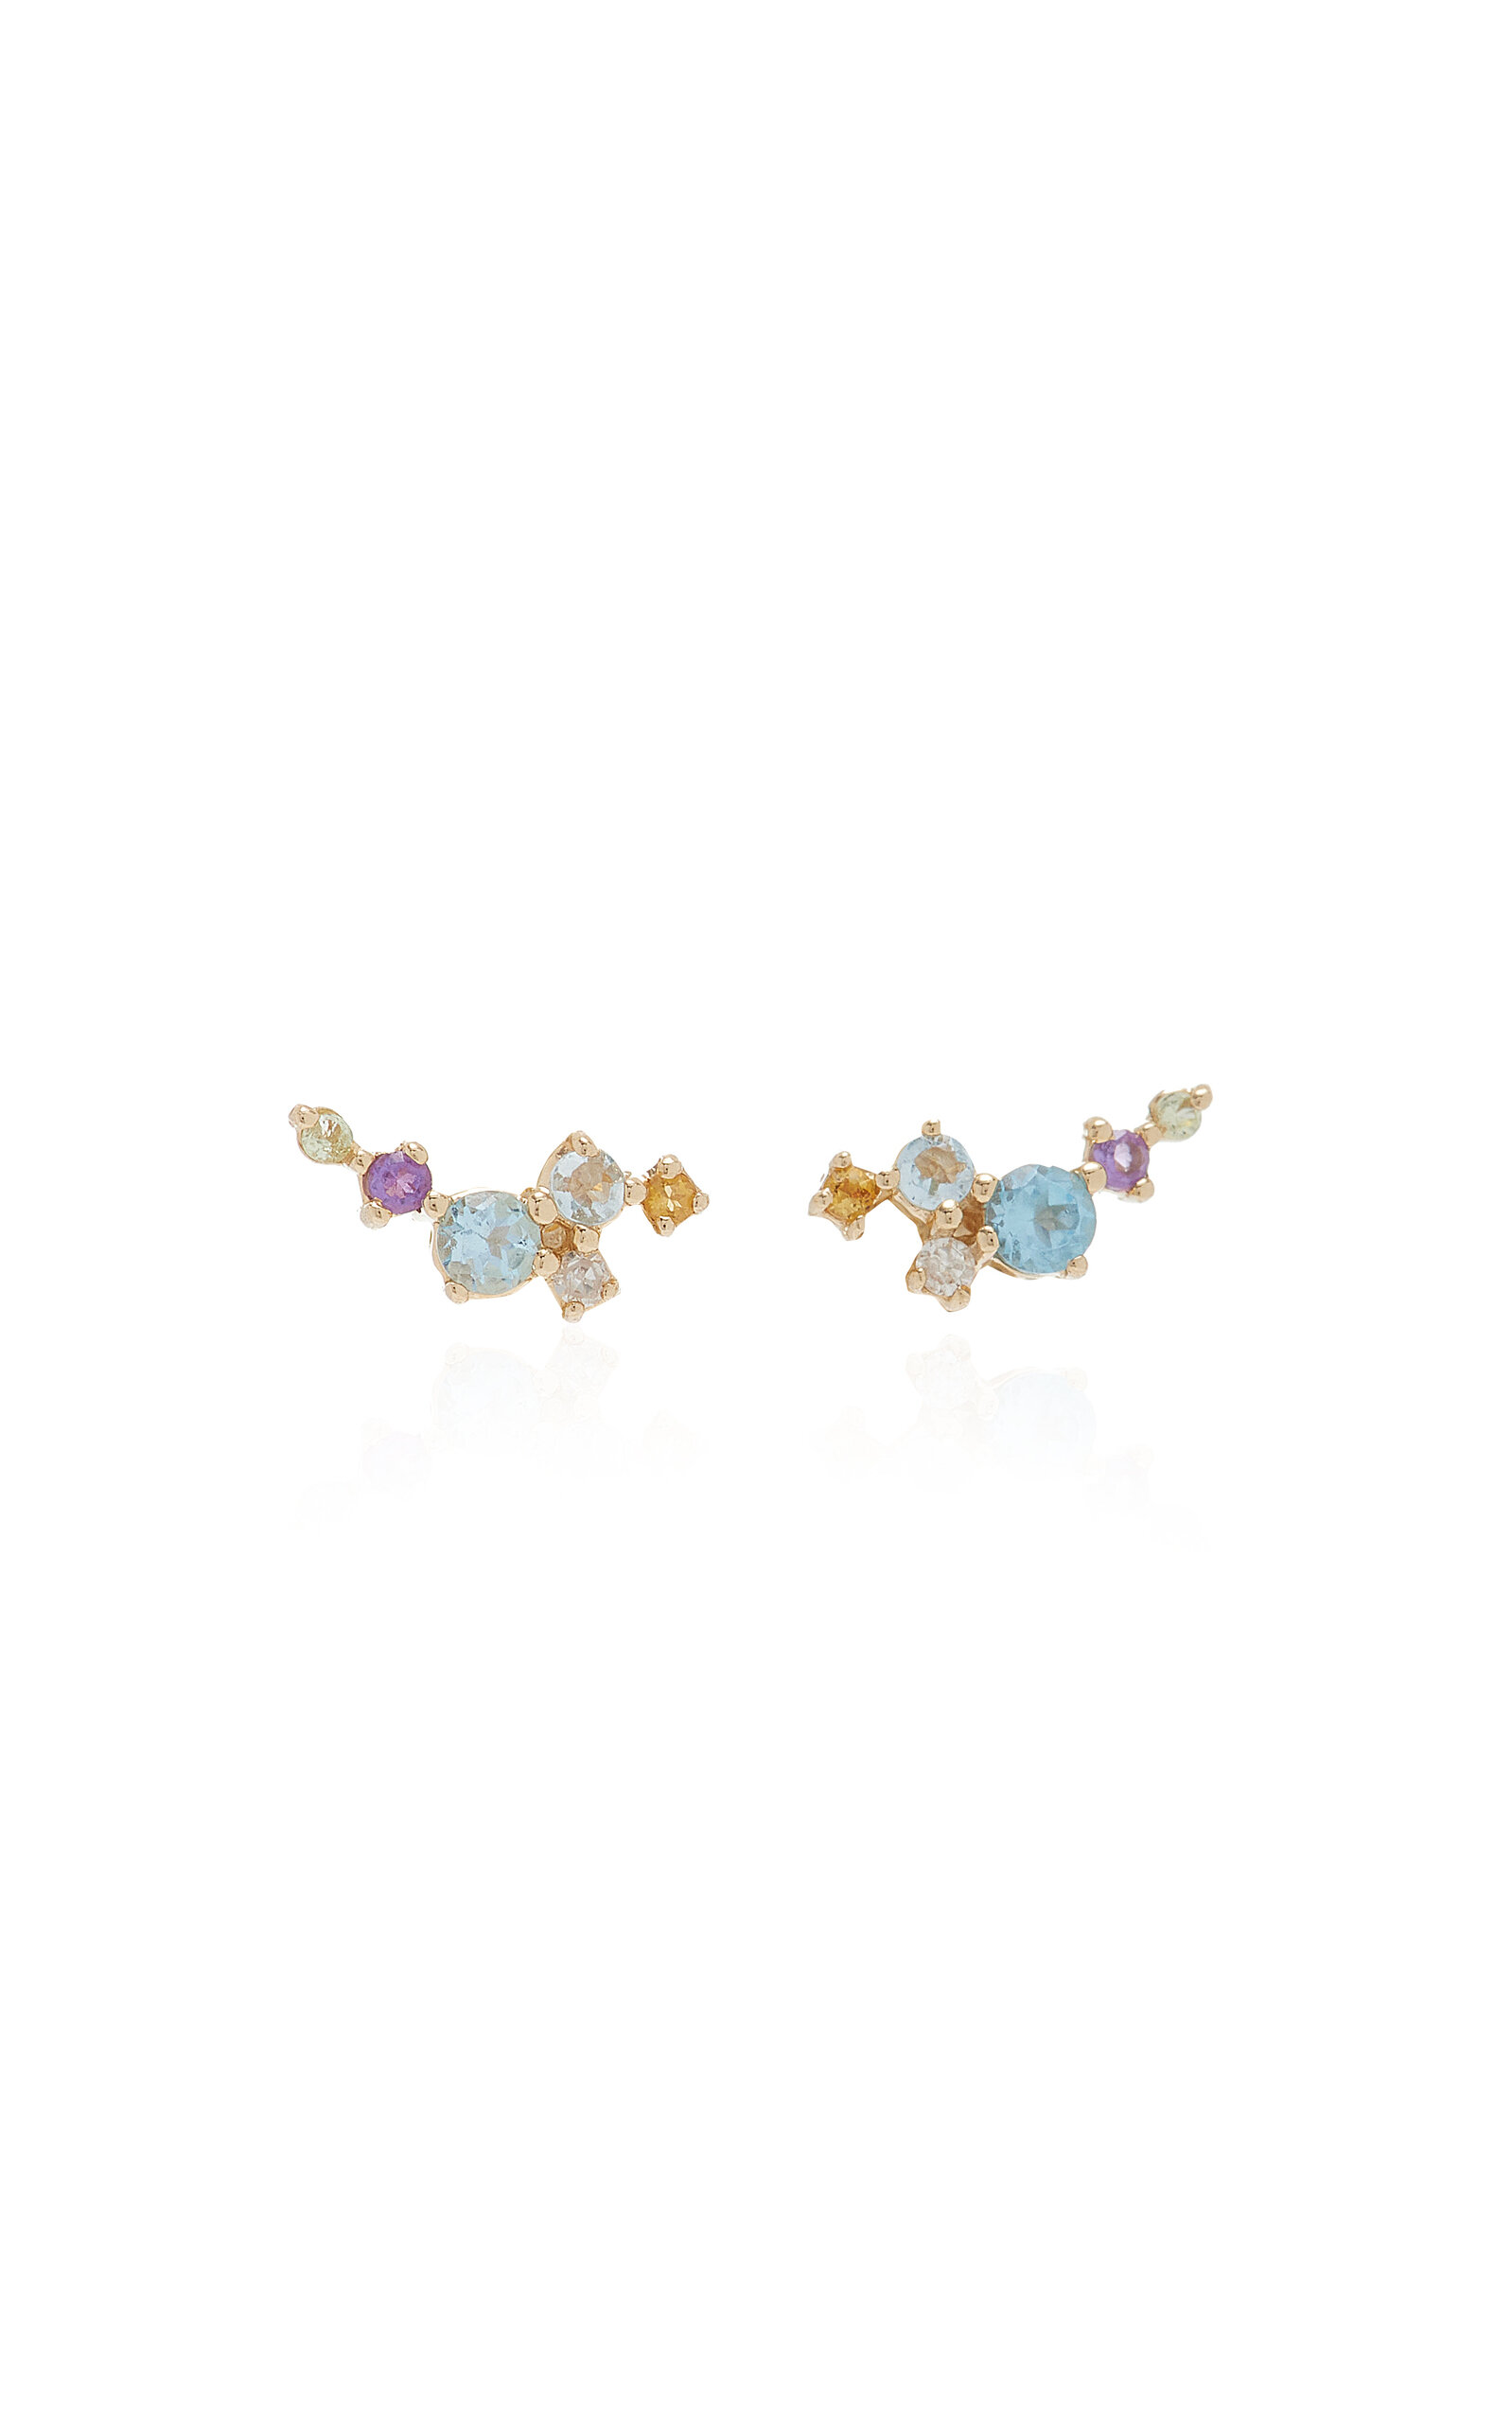 Adina Reyter 14k Yellow Gold Multi-stone Scattered Bubbles Earrings In Blue